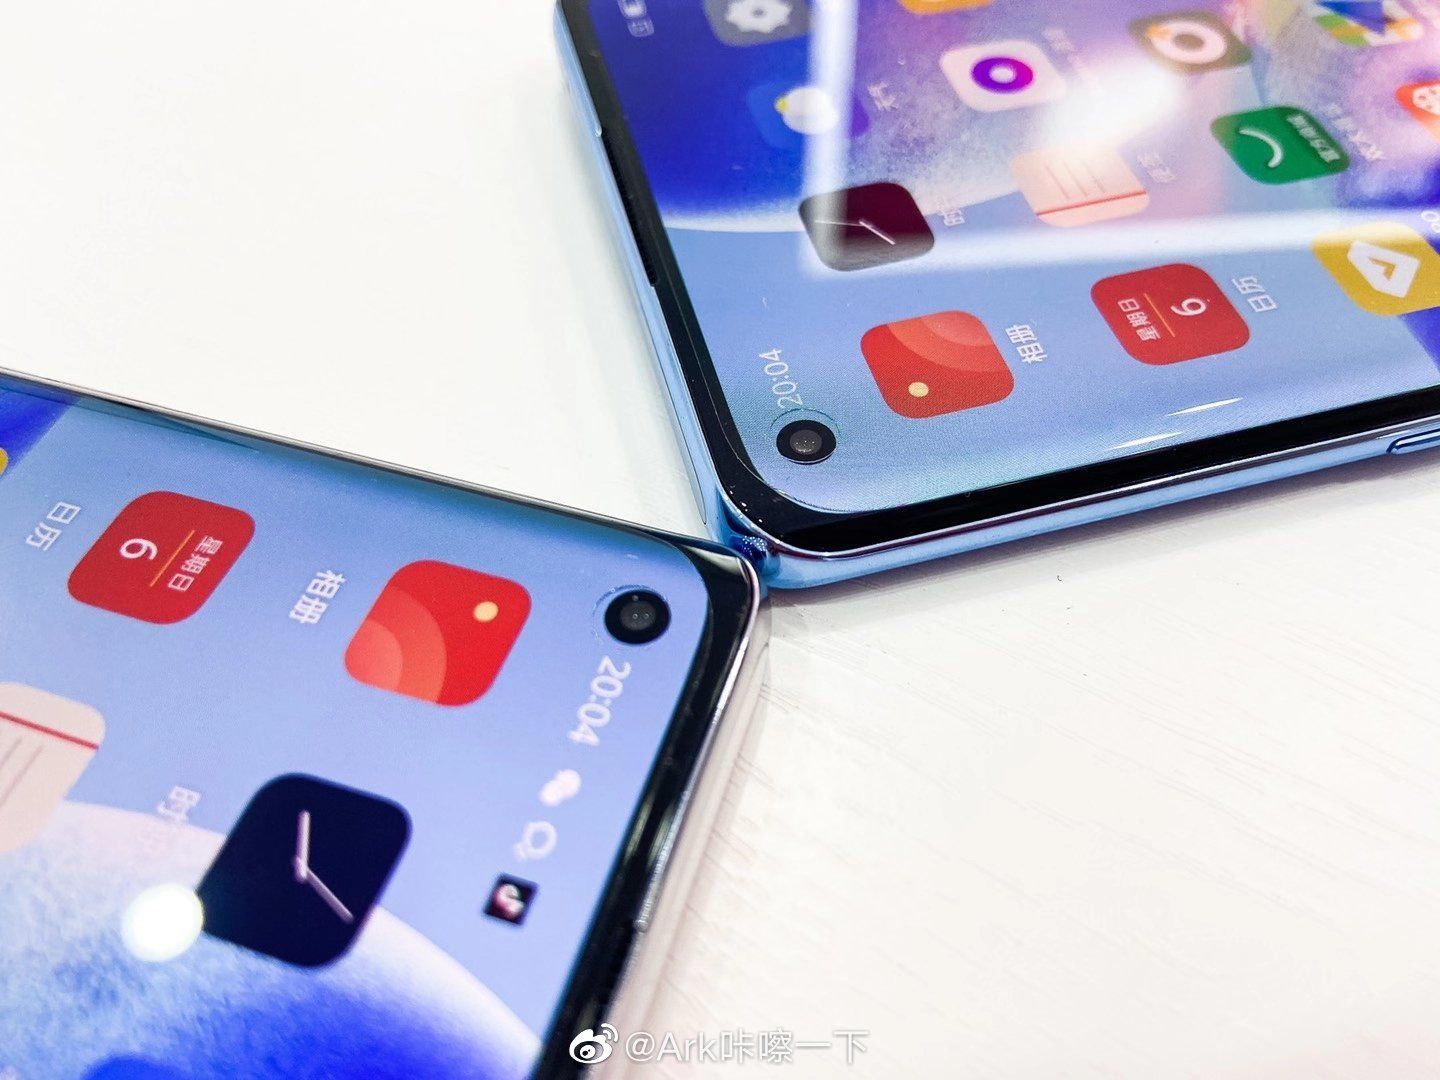 OPPO Reno5 Pro 5G images and key specs appear ahead of launch